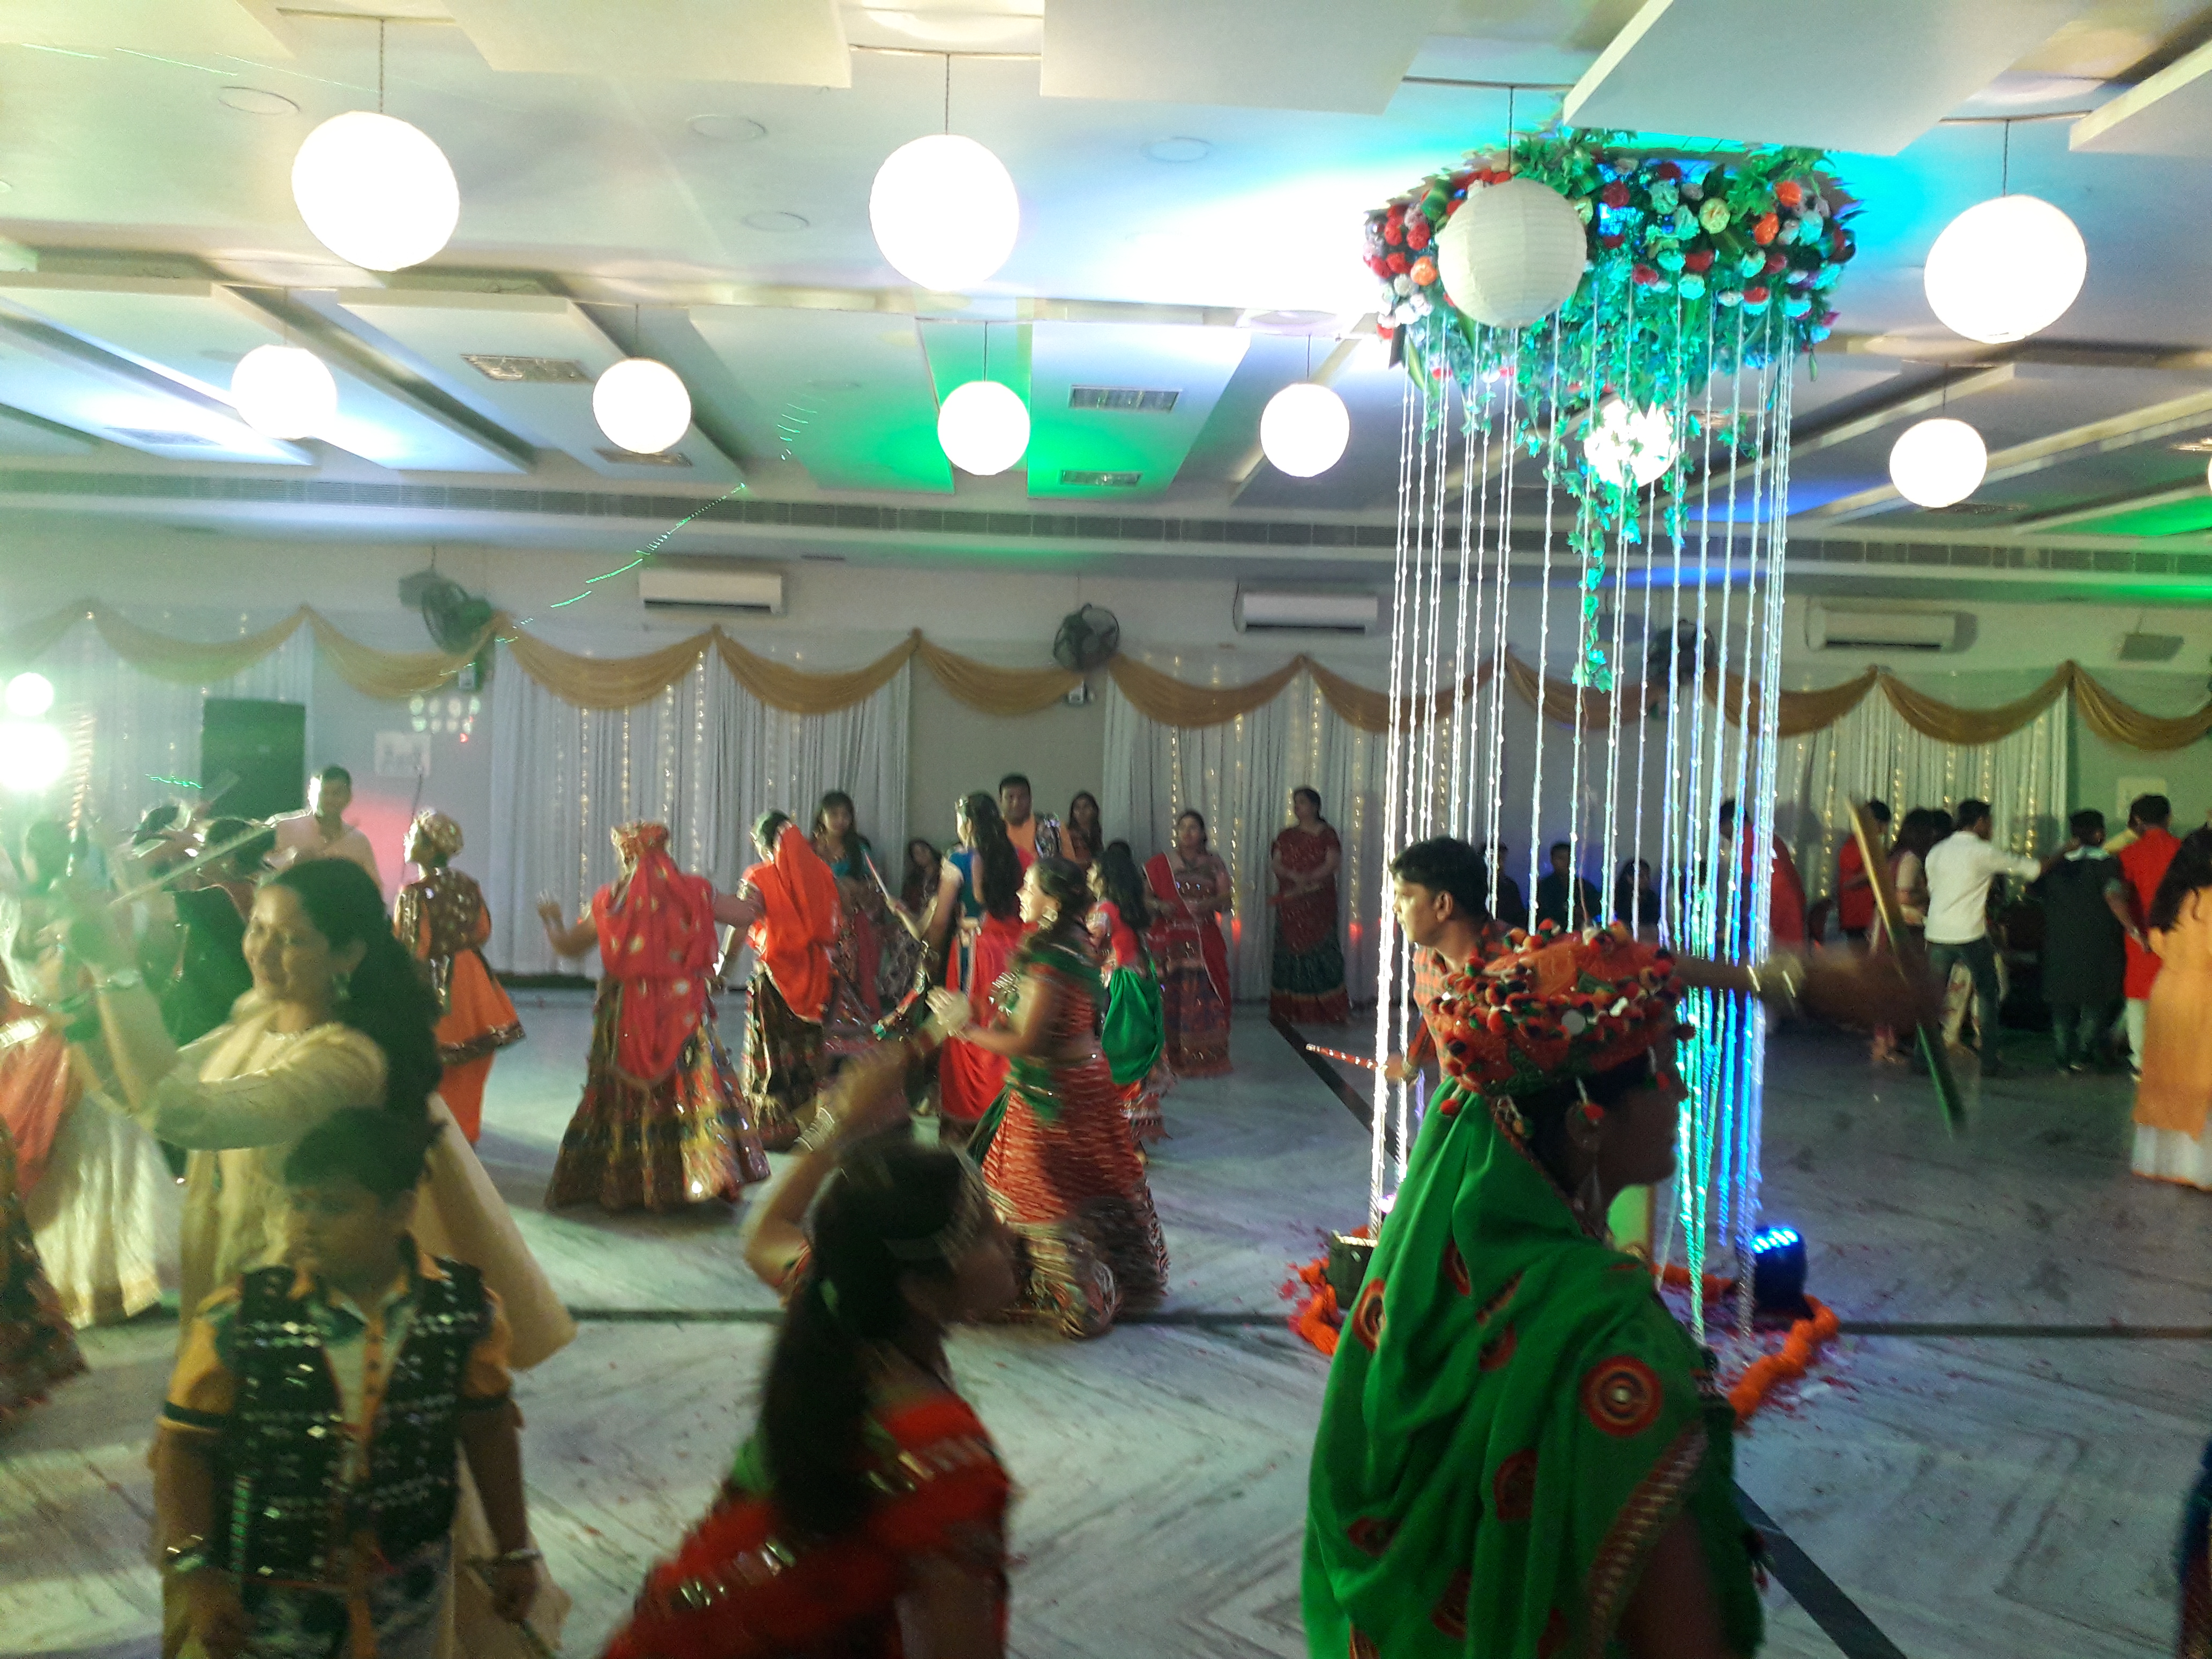 The new generation has a special interest in Garba and Dandiya